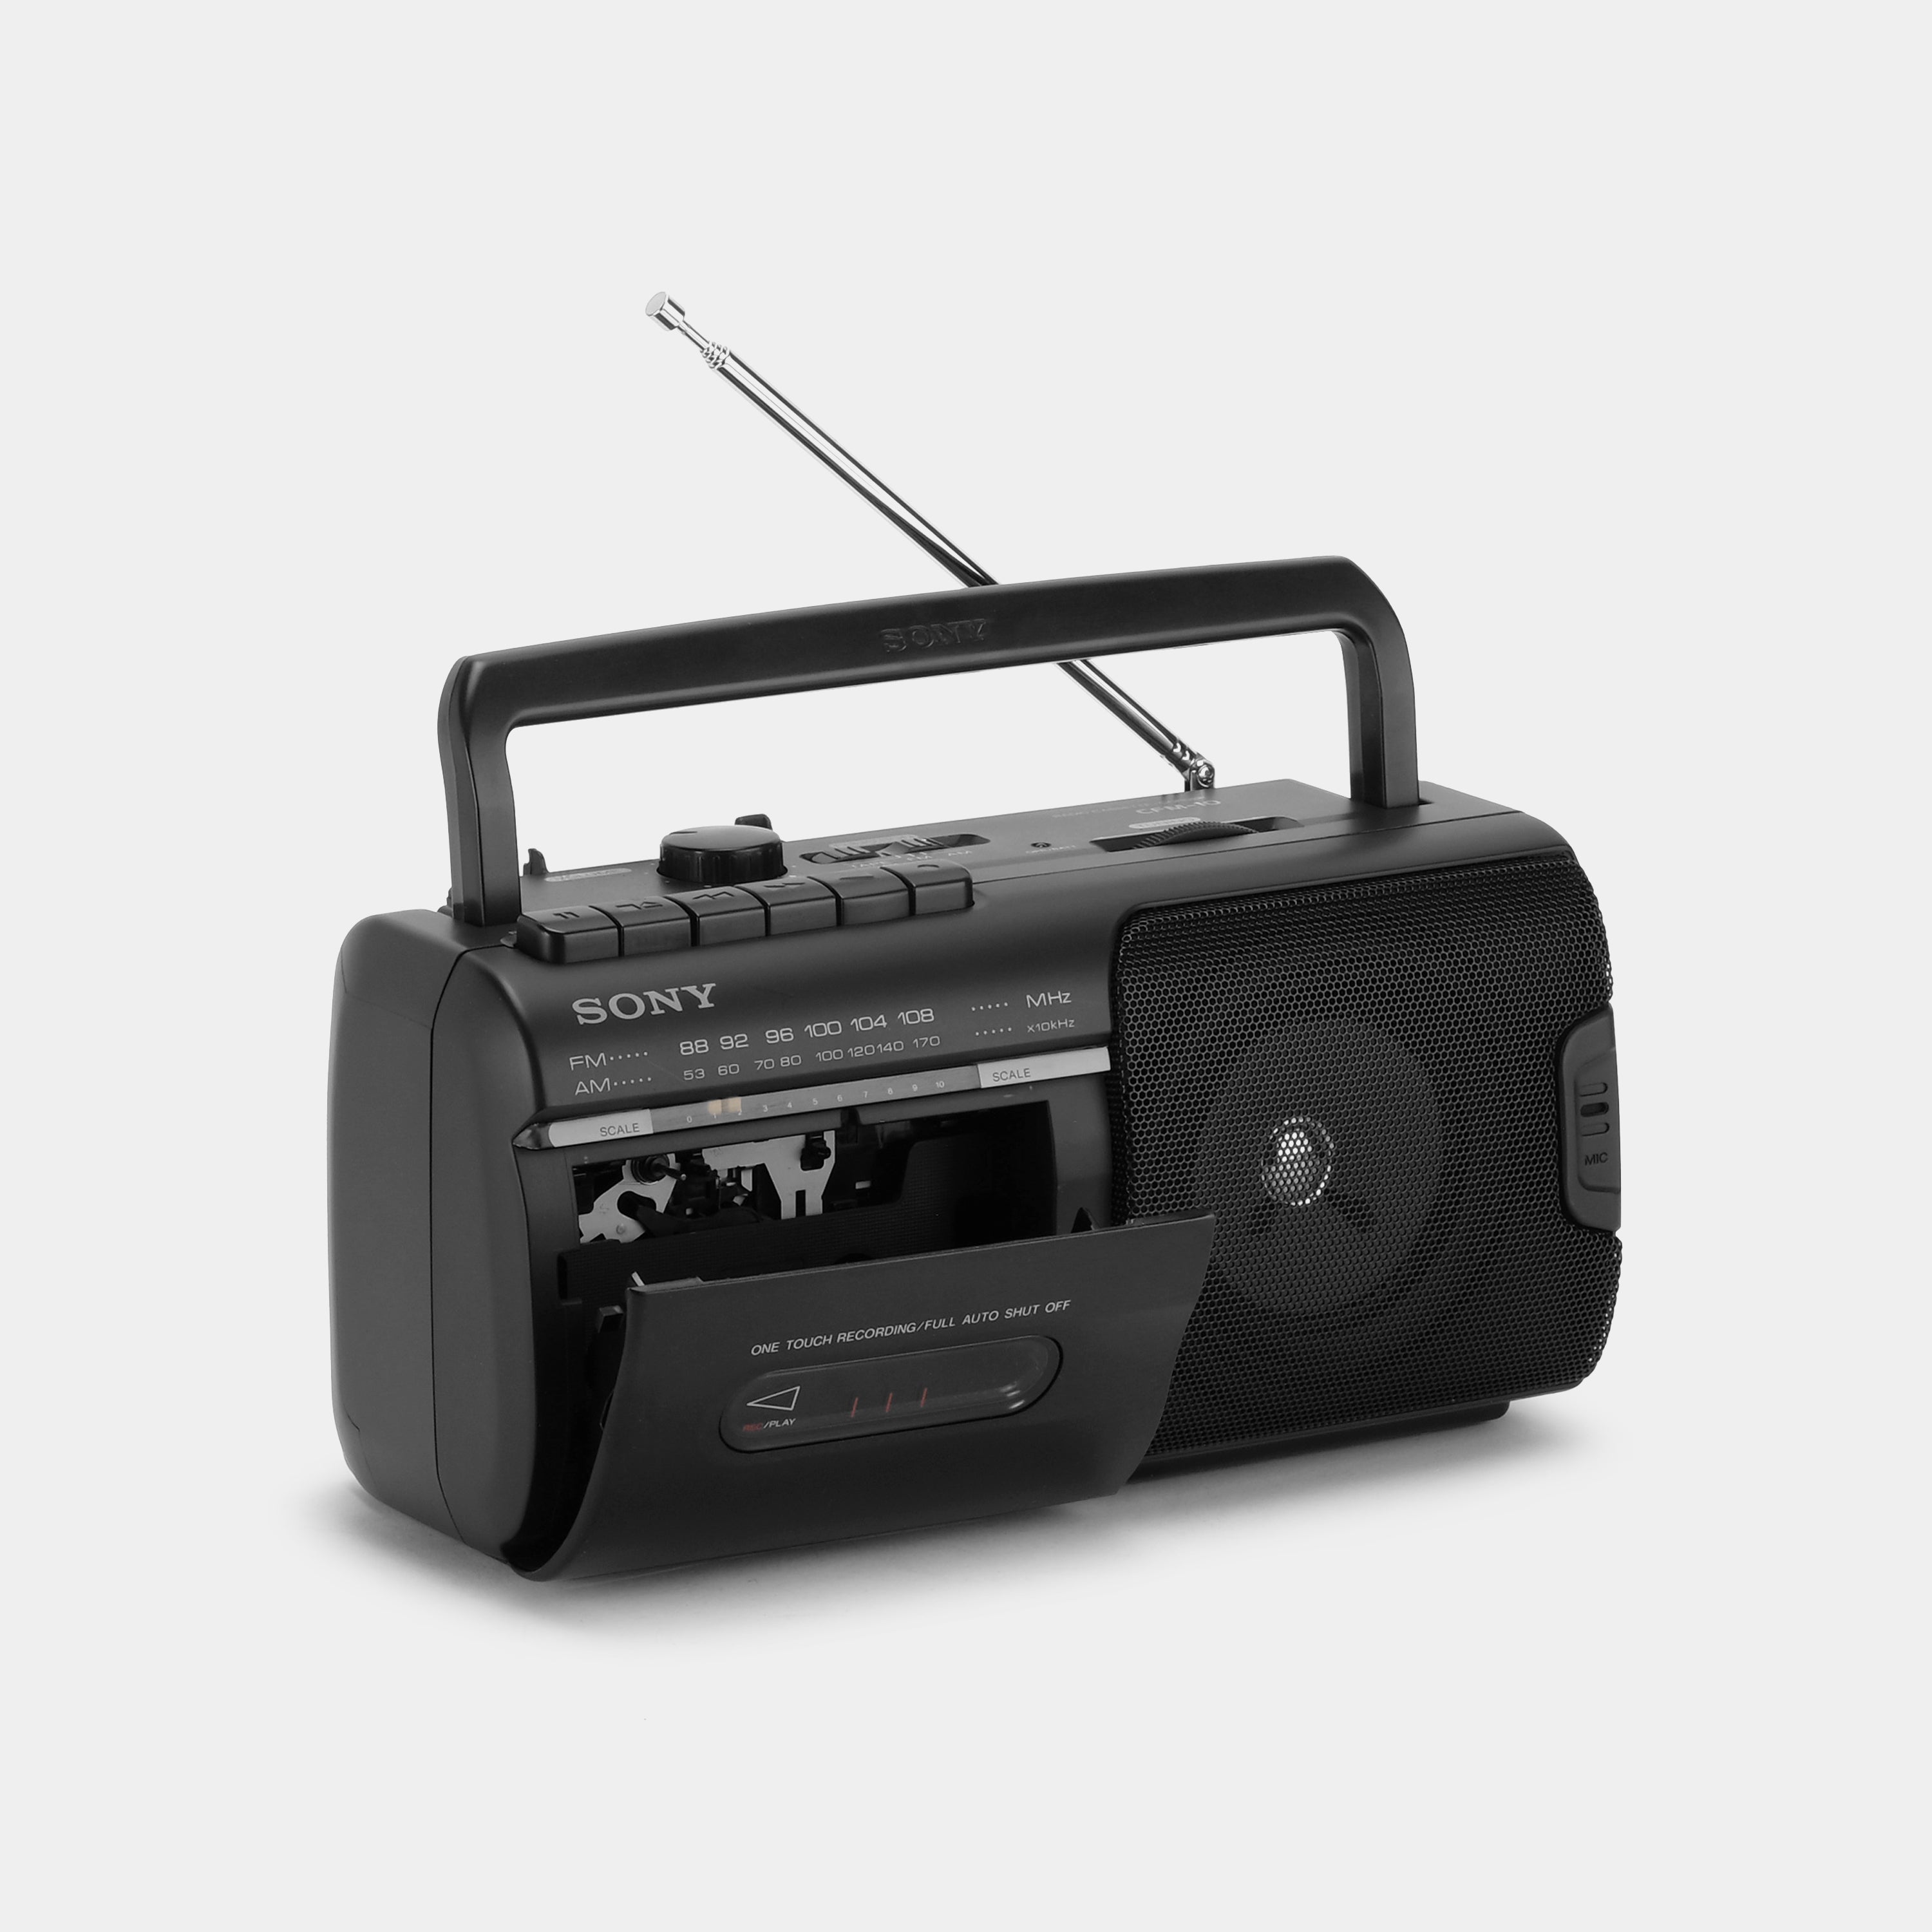 Sony CFM-10 AM/FM Radio Boombox Cassette Recorder and Player